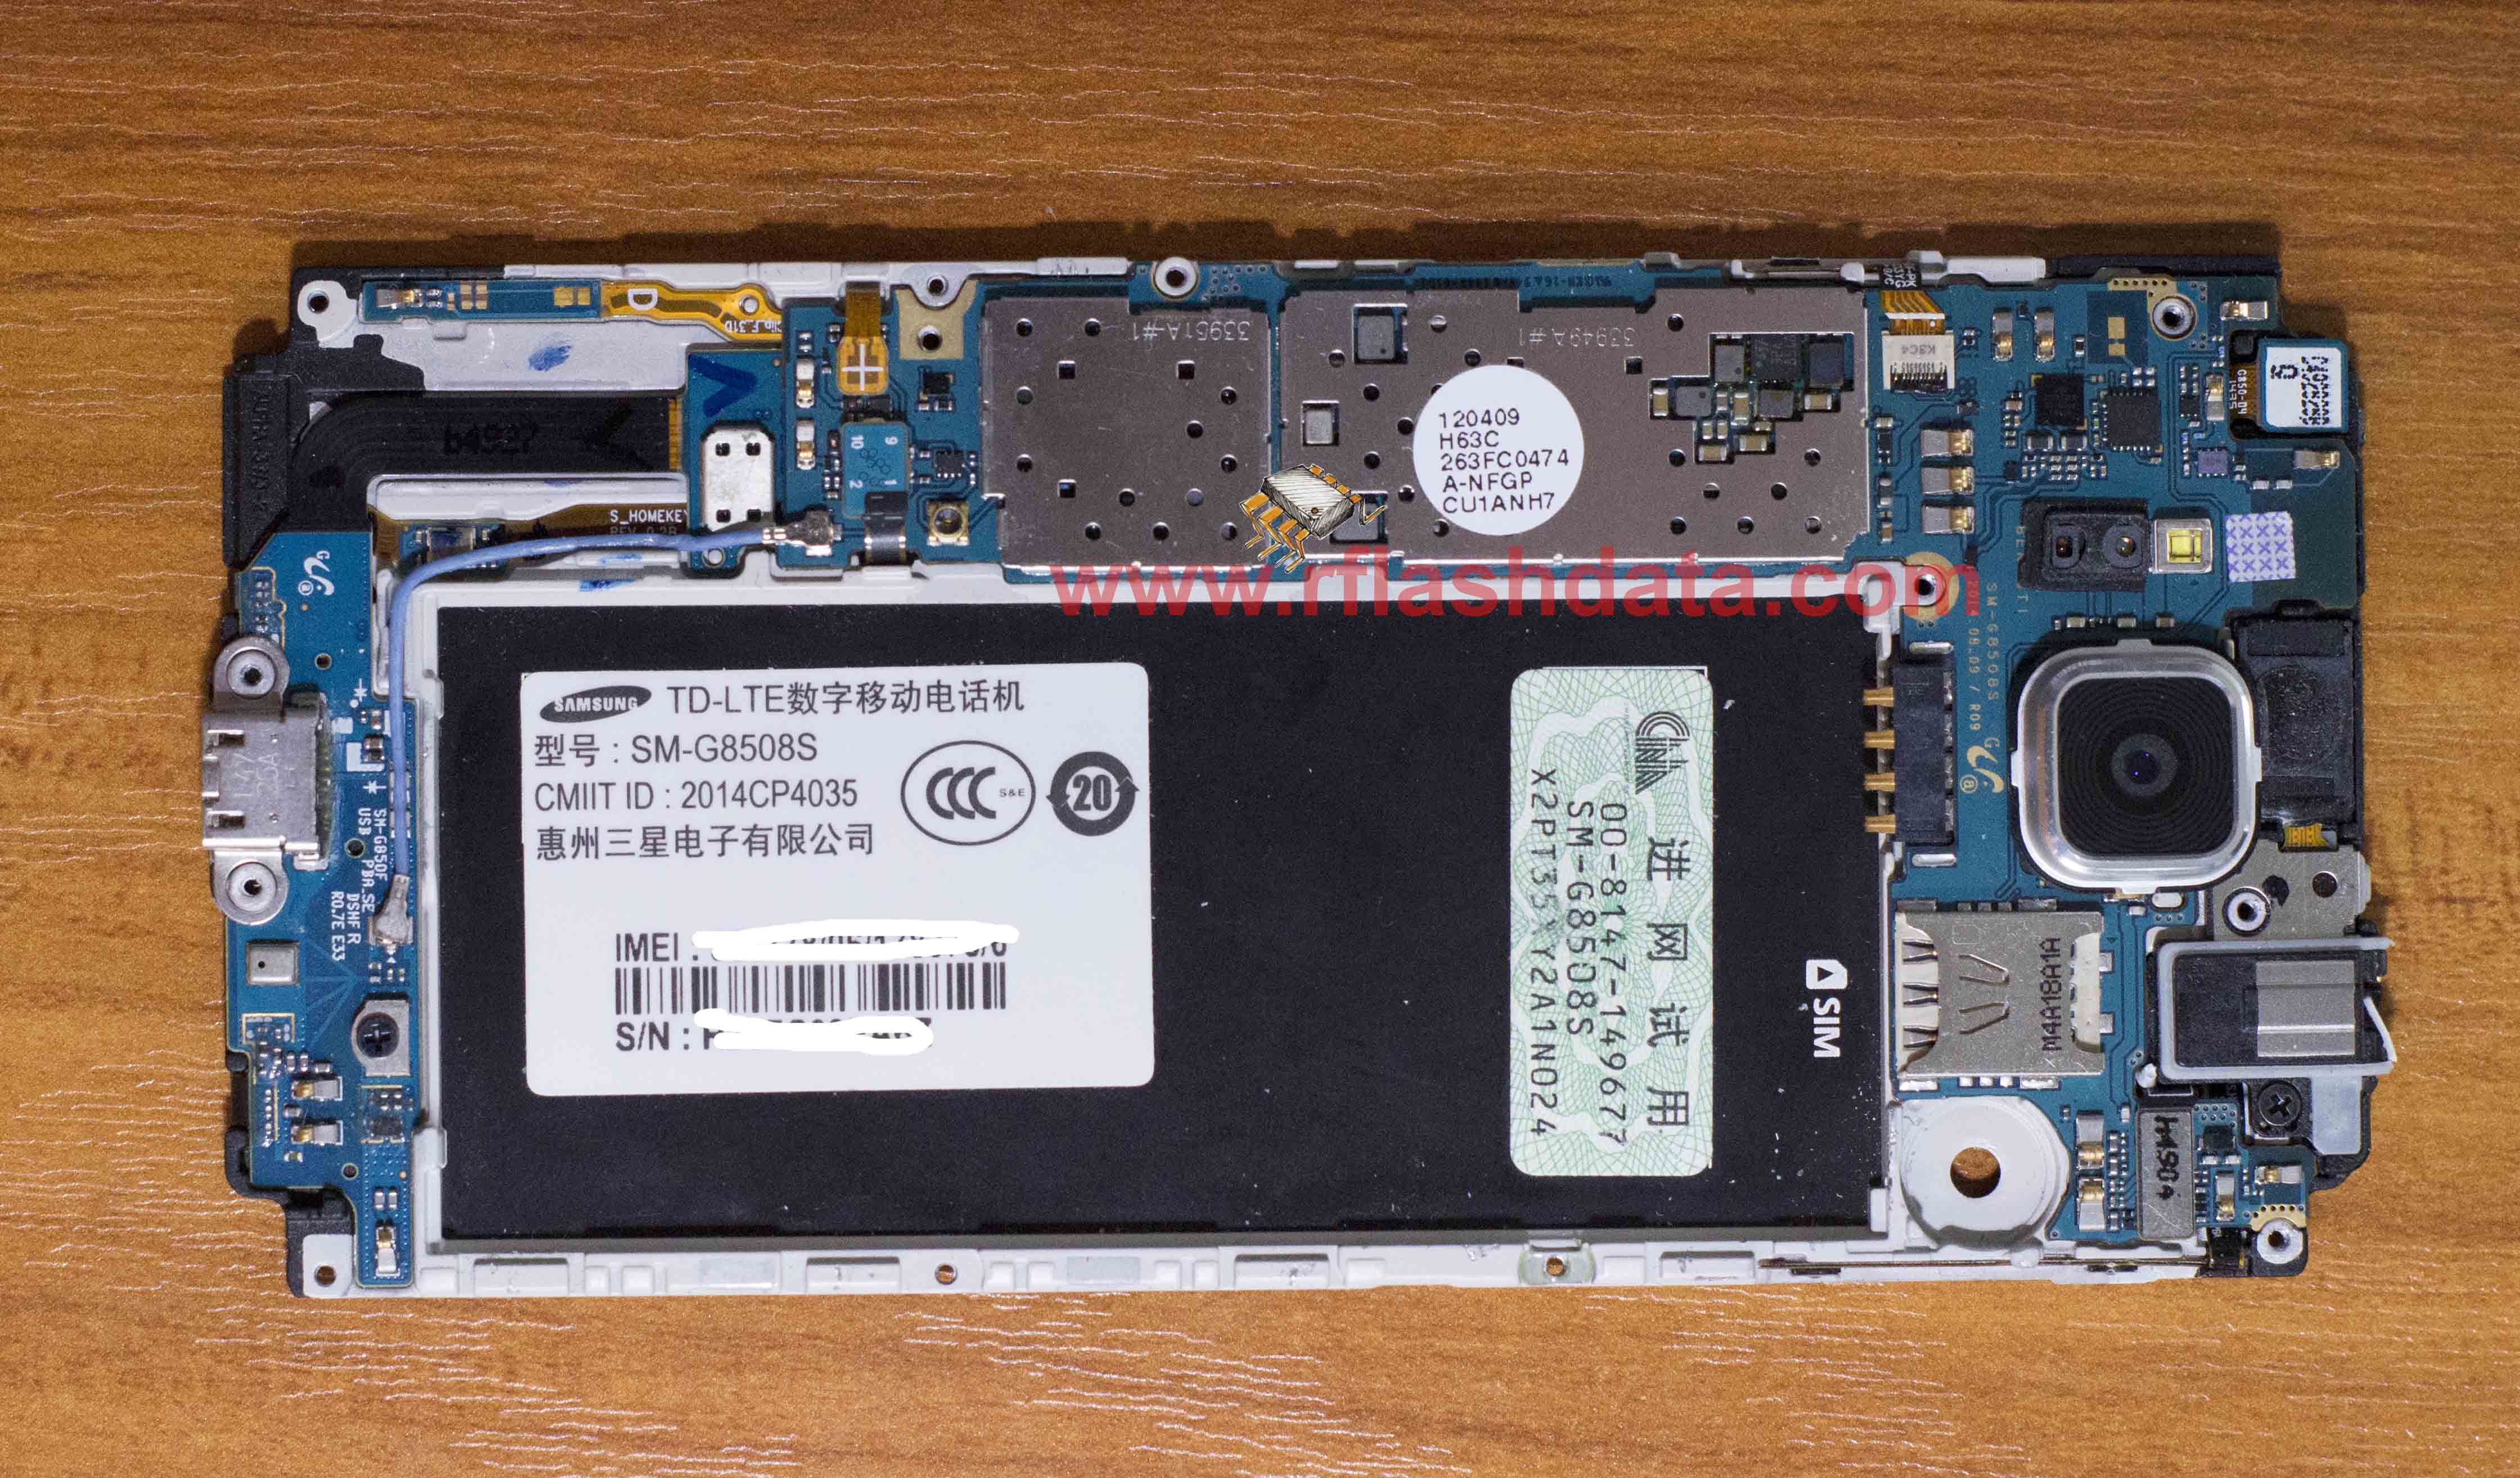 SM-G8508S data recovery